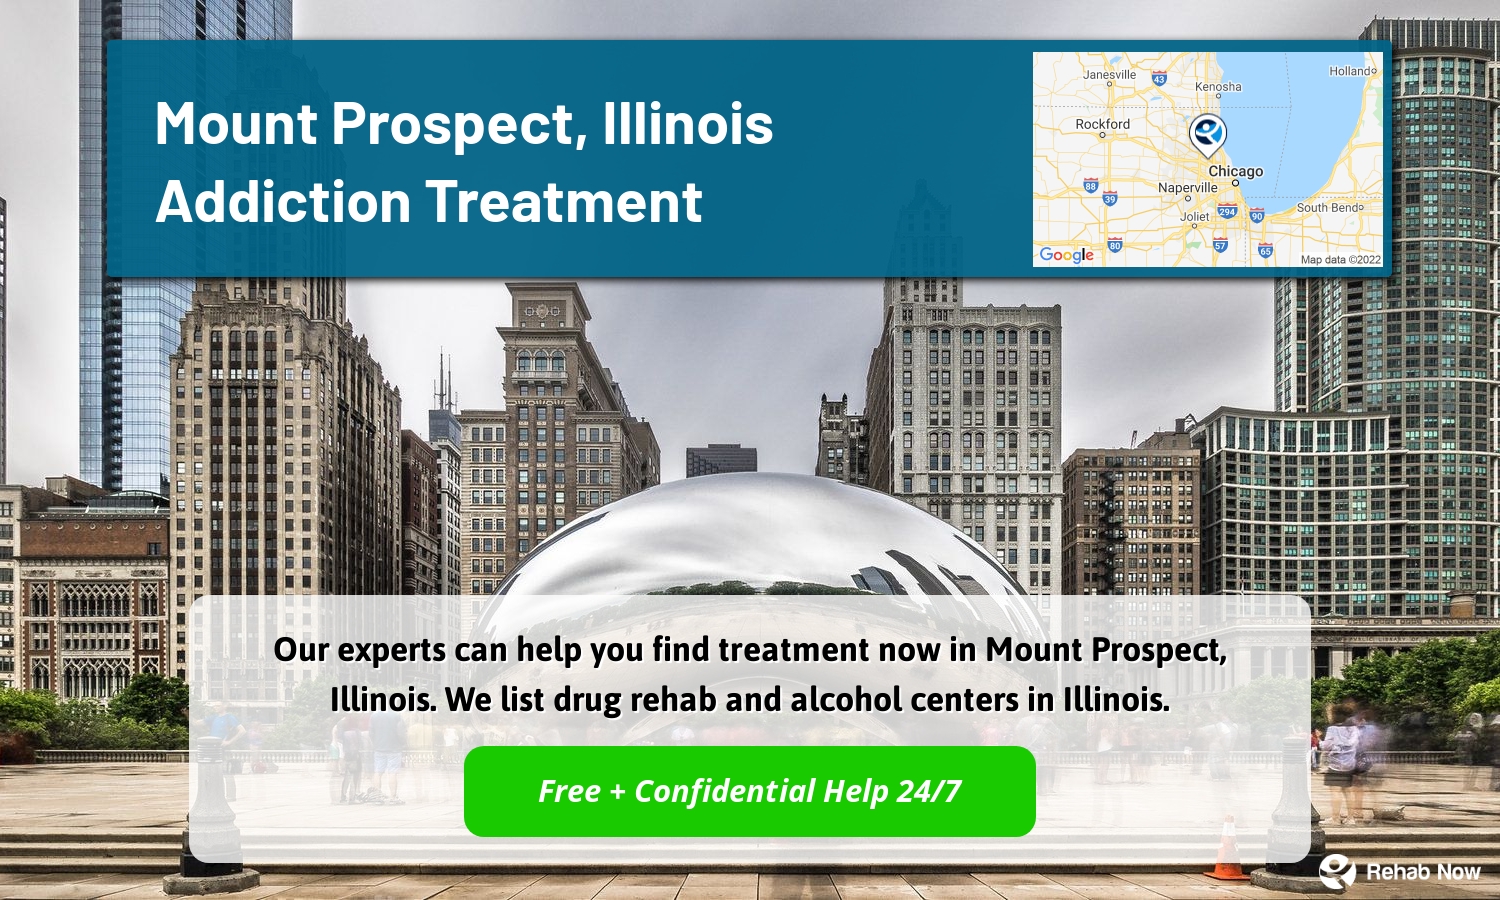 Our experts can help you find treatment now in Mount Prospect, Illinois. We list drug rehab and alcohol centers in Illinois.